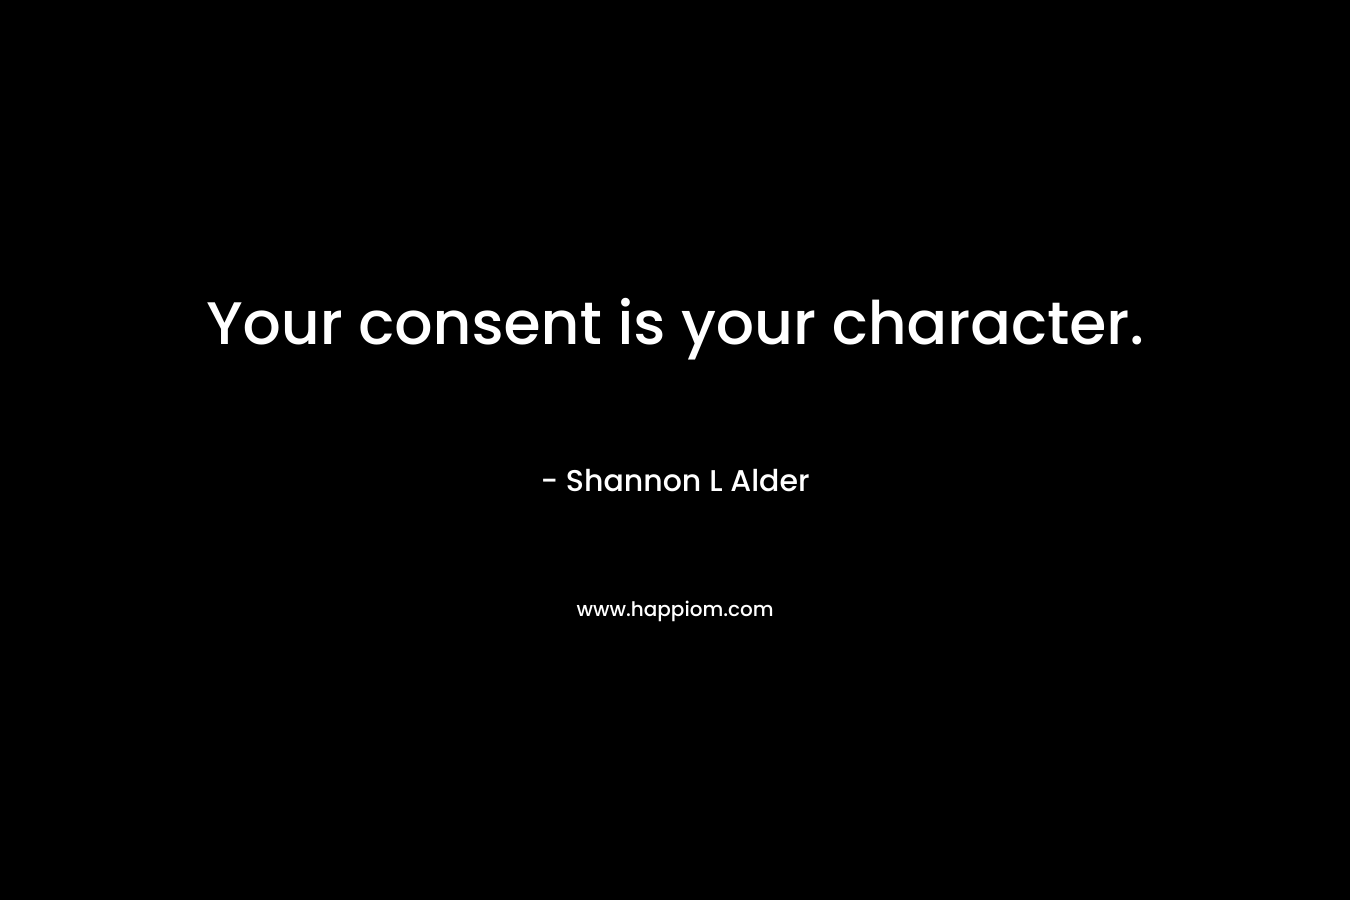 Your consent is your character.